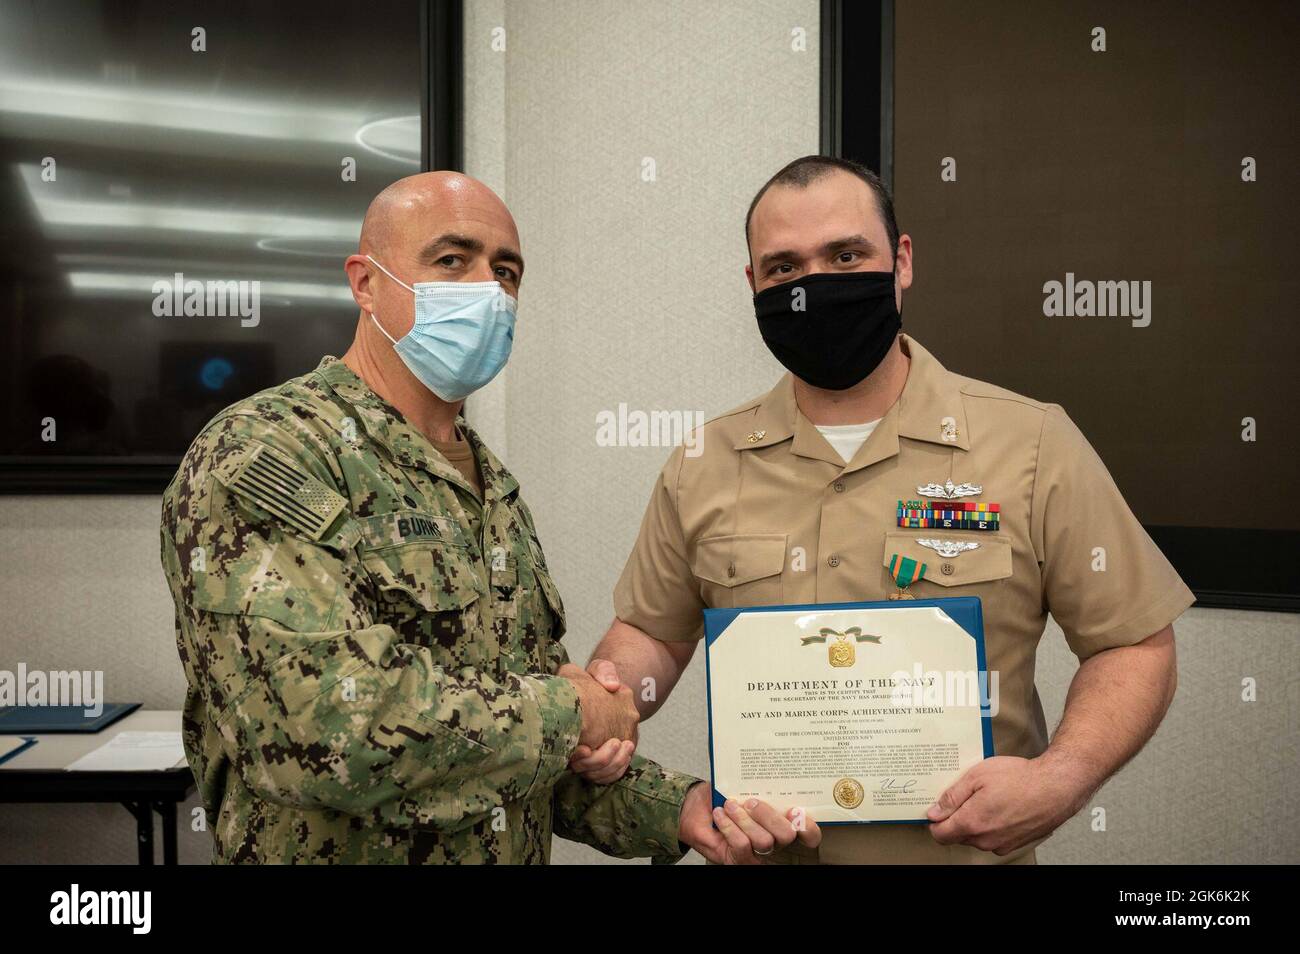 WASHINGTON, DC (Aug. 16, 2021) – Capt. Mark Burns (left), Naval Support Activity Washington commanding officer, presents Chief Fire Controlman Kyle Gregory (right) with a Navy and Marine Corps achievement medal during an award ceremony held onboard Washington Navy Yard. Stock Photo